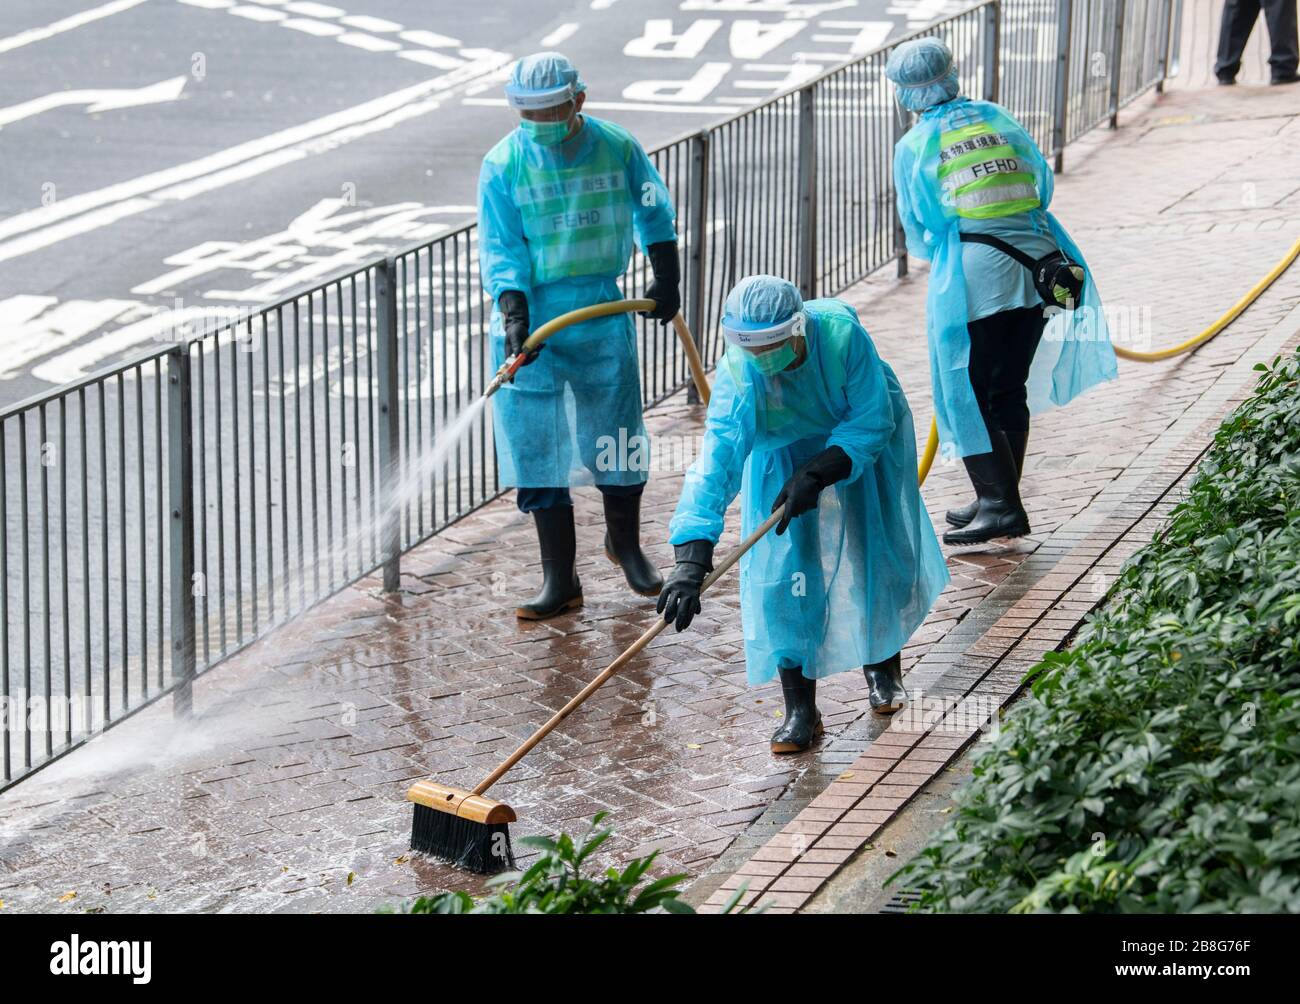 Hong Kong, China. 22nd Mar 2020. Workers from the FEHD (The Food and Environmental Hygiene Department of the Hong Kong Government) disinfect the streets in Fortress Hill amid a rapid spike of Cover-19 virus infections. As the pandemic takes hold Hong Kongers, including students and travelers rushed back to the city before the border closure bringing the infection with them.Alamy Live news/Jayne Russell Credit: Jayne Russell/Alamy Live News Stock Photo